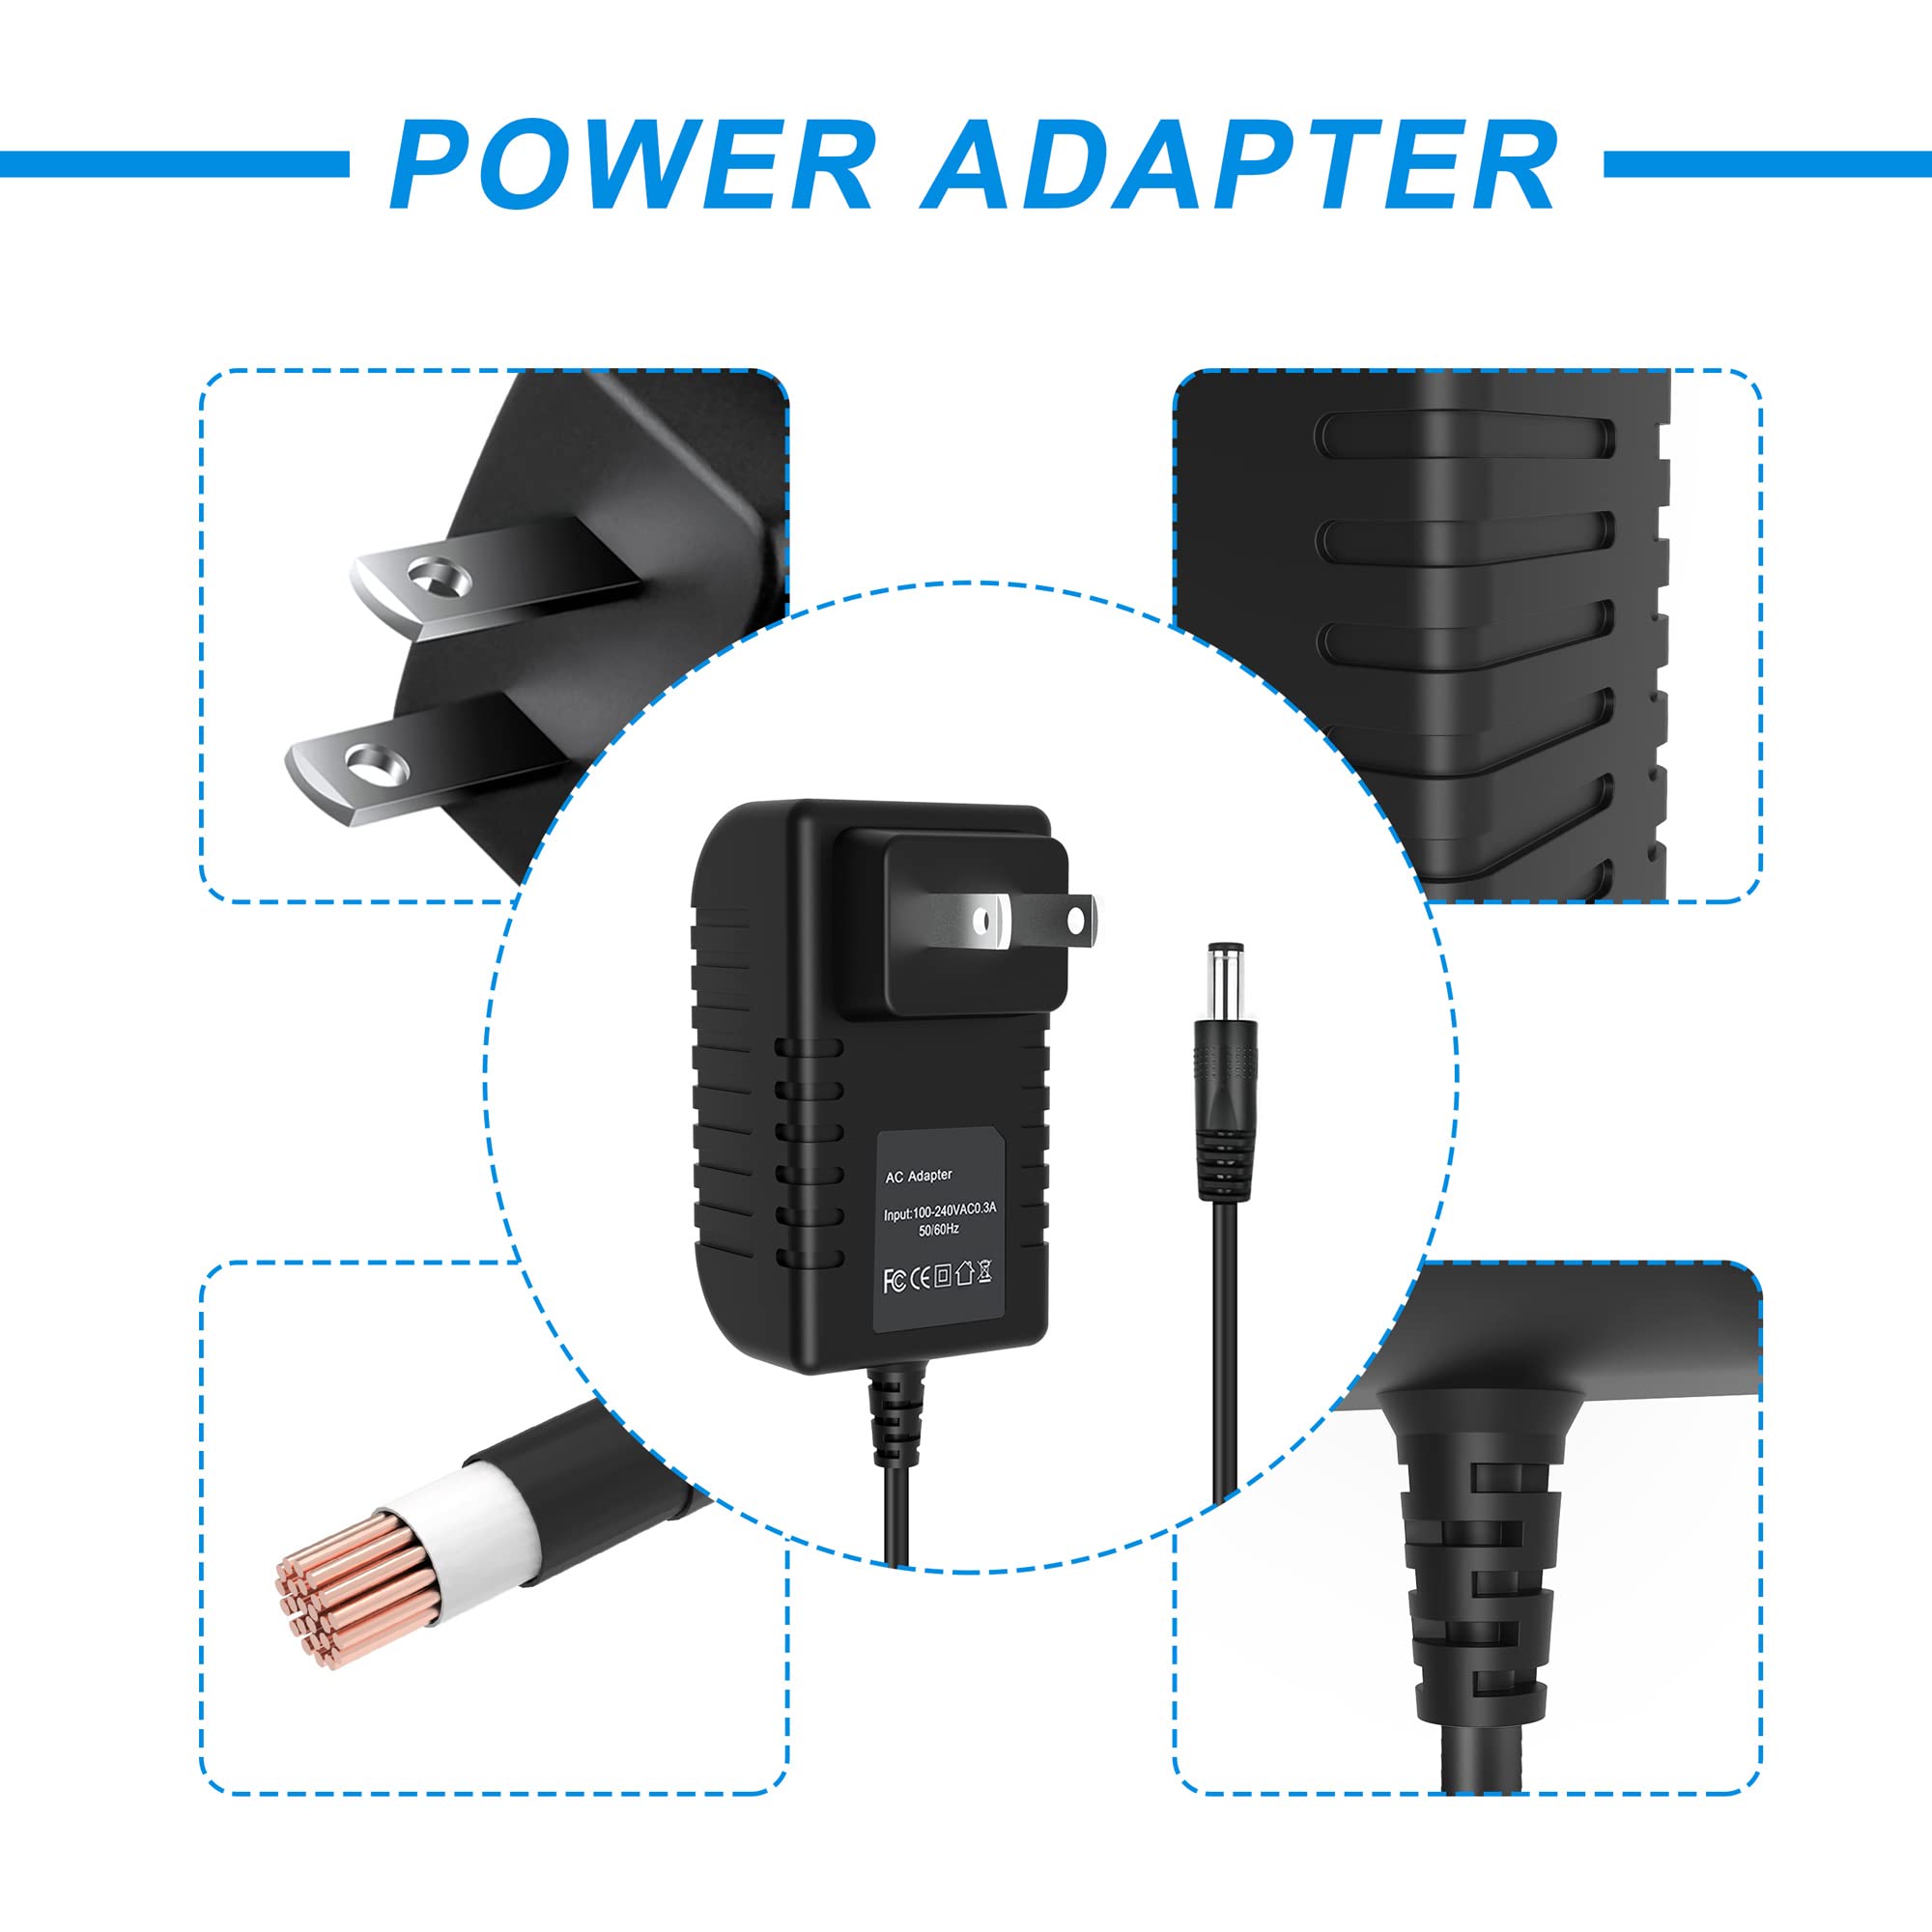 J-ZMQER 12V 2A AC Adapter Power Compatible with Petsafe Wireless Fence IF-100 Pet Containment System